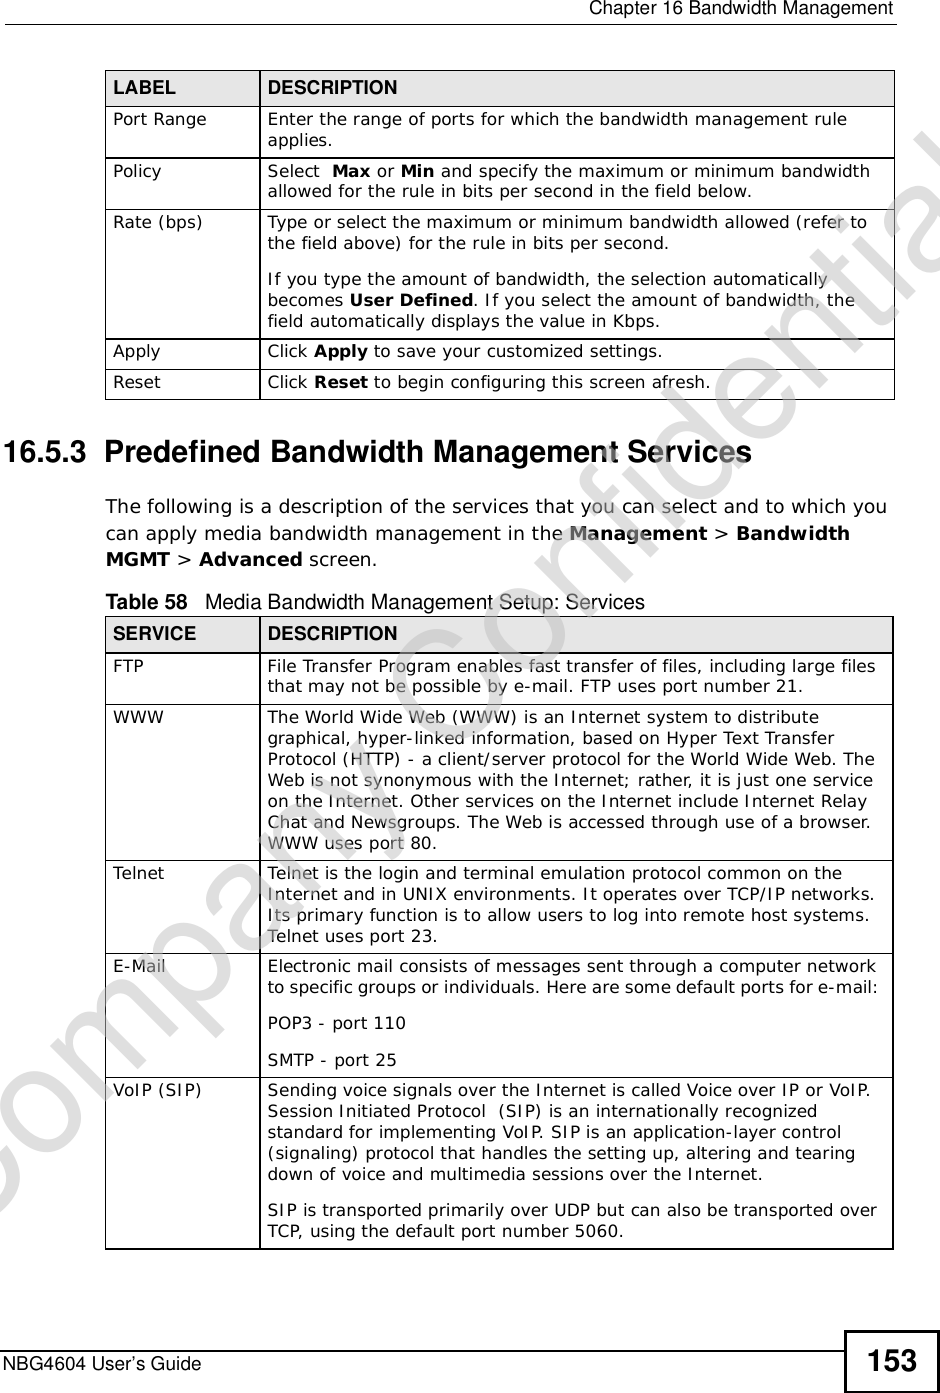  Chapter 16Bandwidth ManagementNBG4604 User’s Guide 15316.5.3  Predefined Bandwidth Management ServicesThe following is a description of the services that you can select and to which you can apply media bandwidth management in the Management &gt; BandwidthMGMT &gt; Advanced screen.  Port Range Enter the range of ports for which the bandwidth management rule applies.Policy Select  Max or Min and specify the maximum or minimum bandwidth allowed for the rule in bits per second in the field below. Rate (bps) Type or select the maximum or minimum bandwidth allowed (refer to the field above) for the rule in bits per second.If you type the amount of bandwidth, the selection automatically becomes User Defined. If you select the amount of bandwidth, the field automatically displays the value in Kbps.Apply Click Apply to save your customized settings.Reset Click Reset to begin configuring this screen afresh.LABEL DESCRIPTIONTable 58   Media Bandwidth Management Setup: ServicesSERVICE DESCRIPTIONFTPFile Transfer Program enables fast transfer of files, including large files that may not be possible by e-mail. FTP uses port number 21.WWWThe World Wide Web (WWW) is an Internet system to distribute graphical, hyper-linked information, based on Hyper Text Transfer Protocol (HTTP) - a client/server protocol for the World Wide Web. The Web is not synonymous with the Internet; rather, it is just one service on the Internet. Other services on the Internet include Internet Relay Chat and Newsgroups. The Web is accessed through use of a browser. WWW uses port 80.TelnetTelnet is the login and terminal emulation protocol common on the Internet and in UNIX environments. It operates over TCP/IP networks. Its primary function is to allow users to log into remote host systems. Telnet uses port 23.E-MailElectronic mail consists of messages sent through a computer network to specific groups or individuals. Here are some default ports for e-mail: POP3 - port 110SMTP - port 25VoIP (SIP)Sending voice signals over the Internet is called Voice over IP or VoIP. Session Initiated Protocol  (SIP) is an internationally recognized standard for implementing VoIP. SIP is an application-layer control (signaling) protocol that handles the setting up, altering and tearing down of voice and multimedia sessions over the Internet.SIP is transported primarily over UDP but can also be transported over TCP, using the default port number 5060. Company Confidential